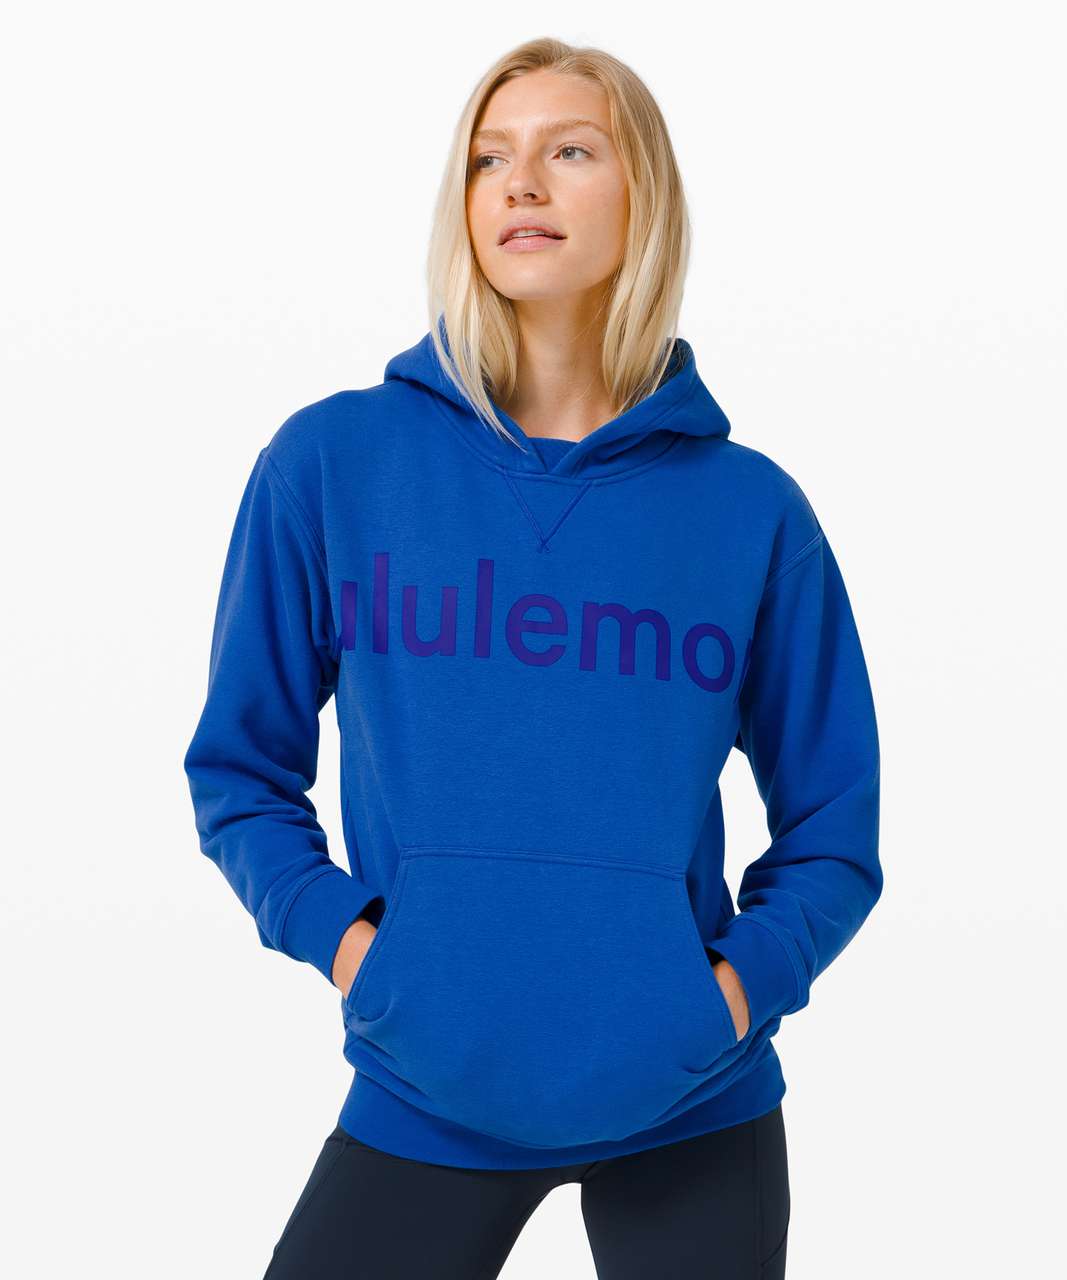 Lululemon All Yours Hoodie *Graphic - Cerulean Blue